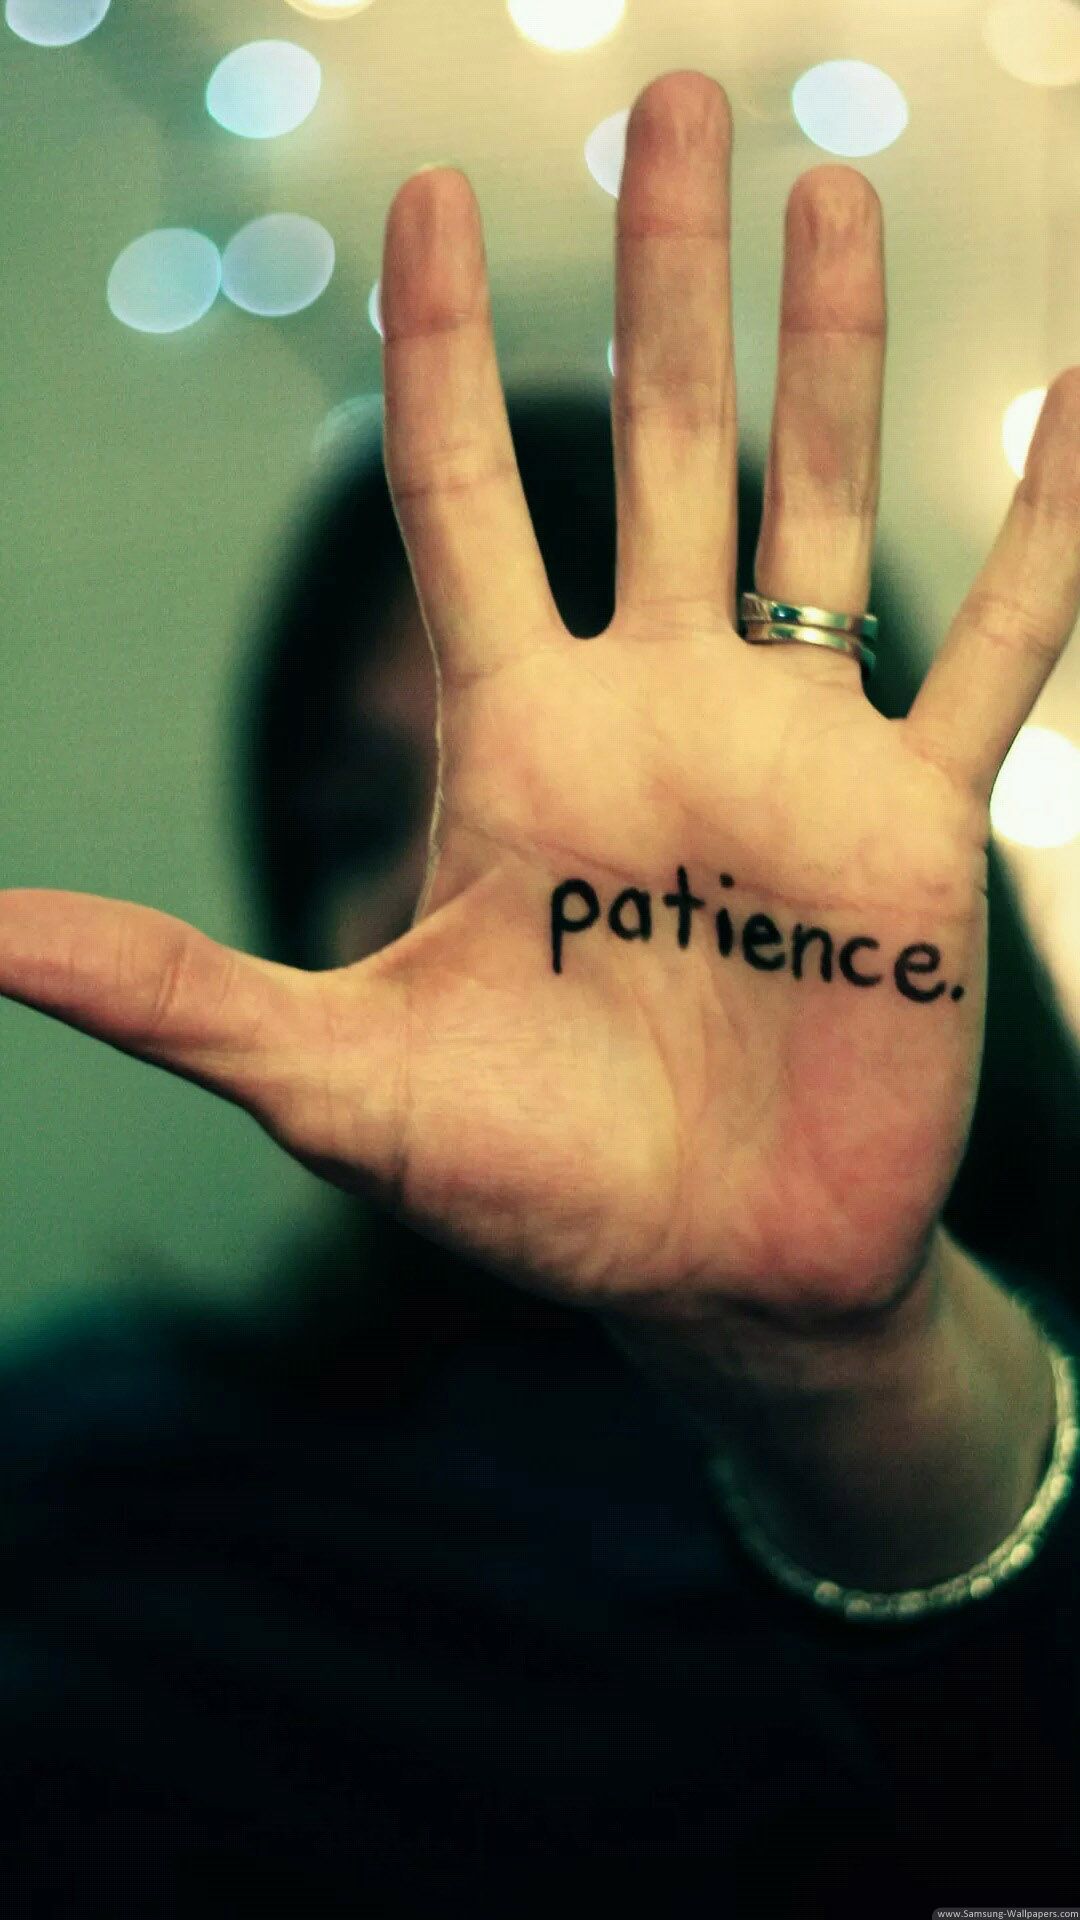 Patience Is The Understanding That Events Unfold At